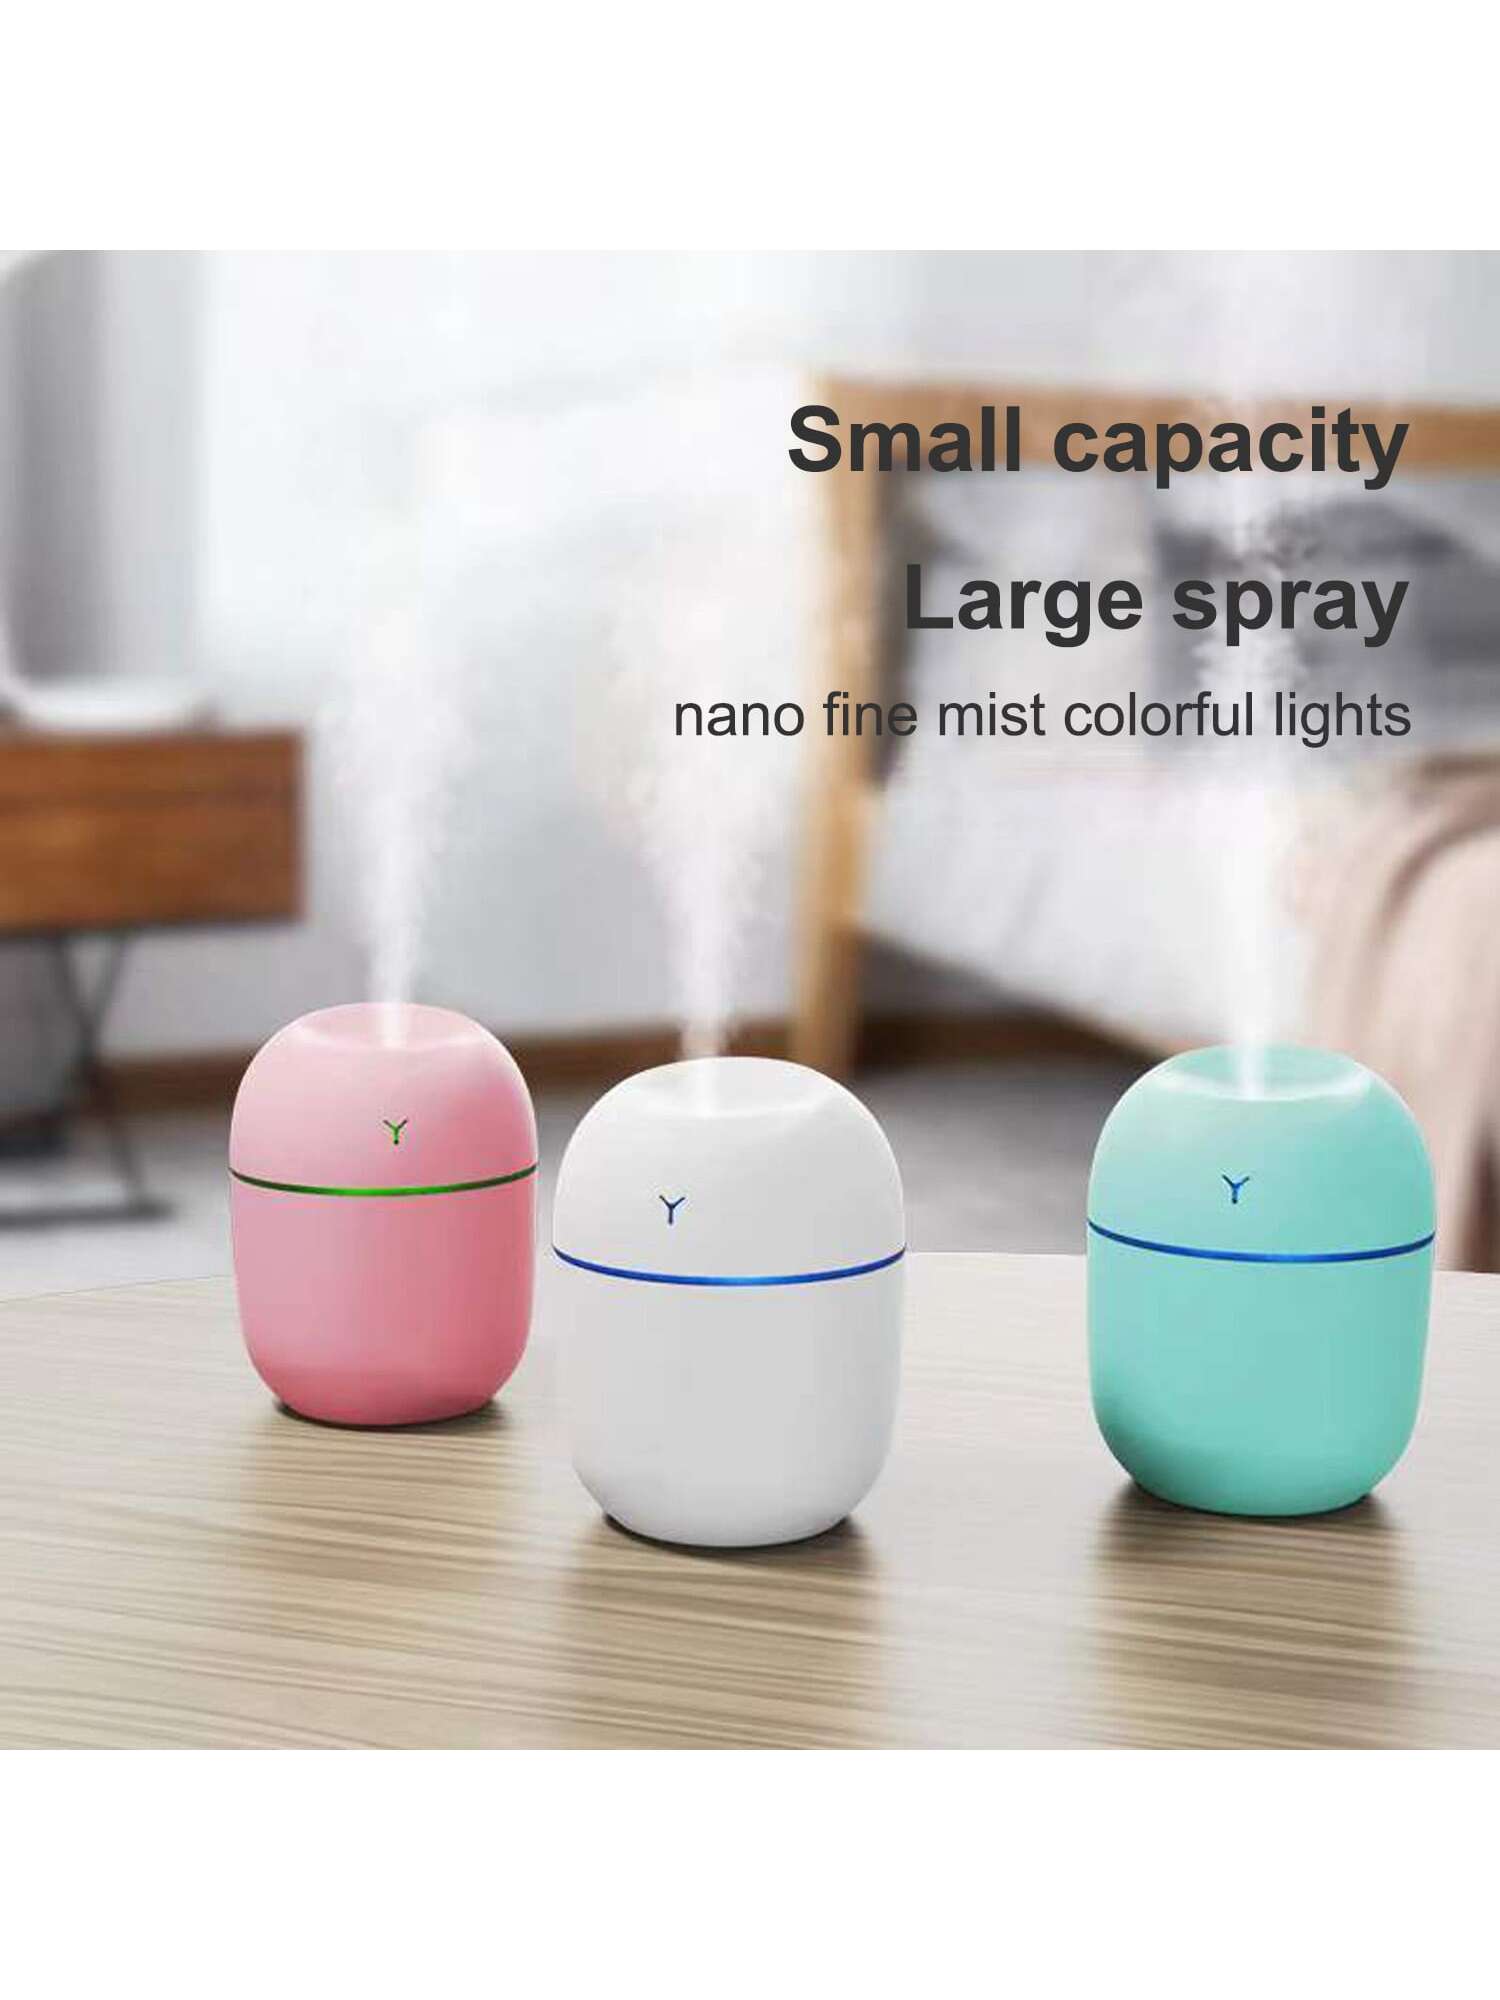 250ml Mini Egg Drop Humidifier Car Fog Home Desktop Air Mute Small Humidifier(The humidifier works only when plugged in)-Green-2